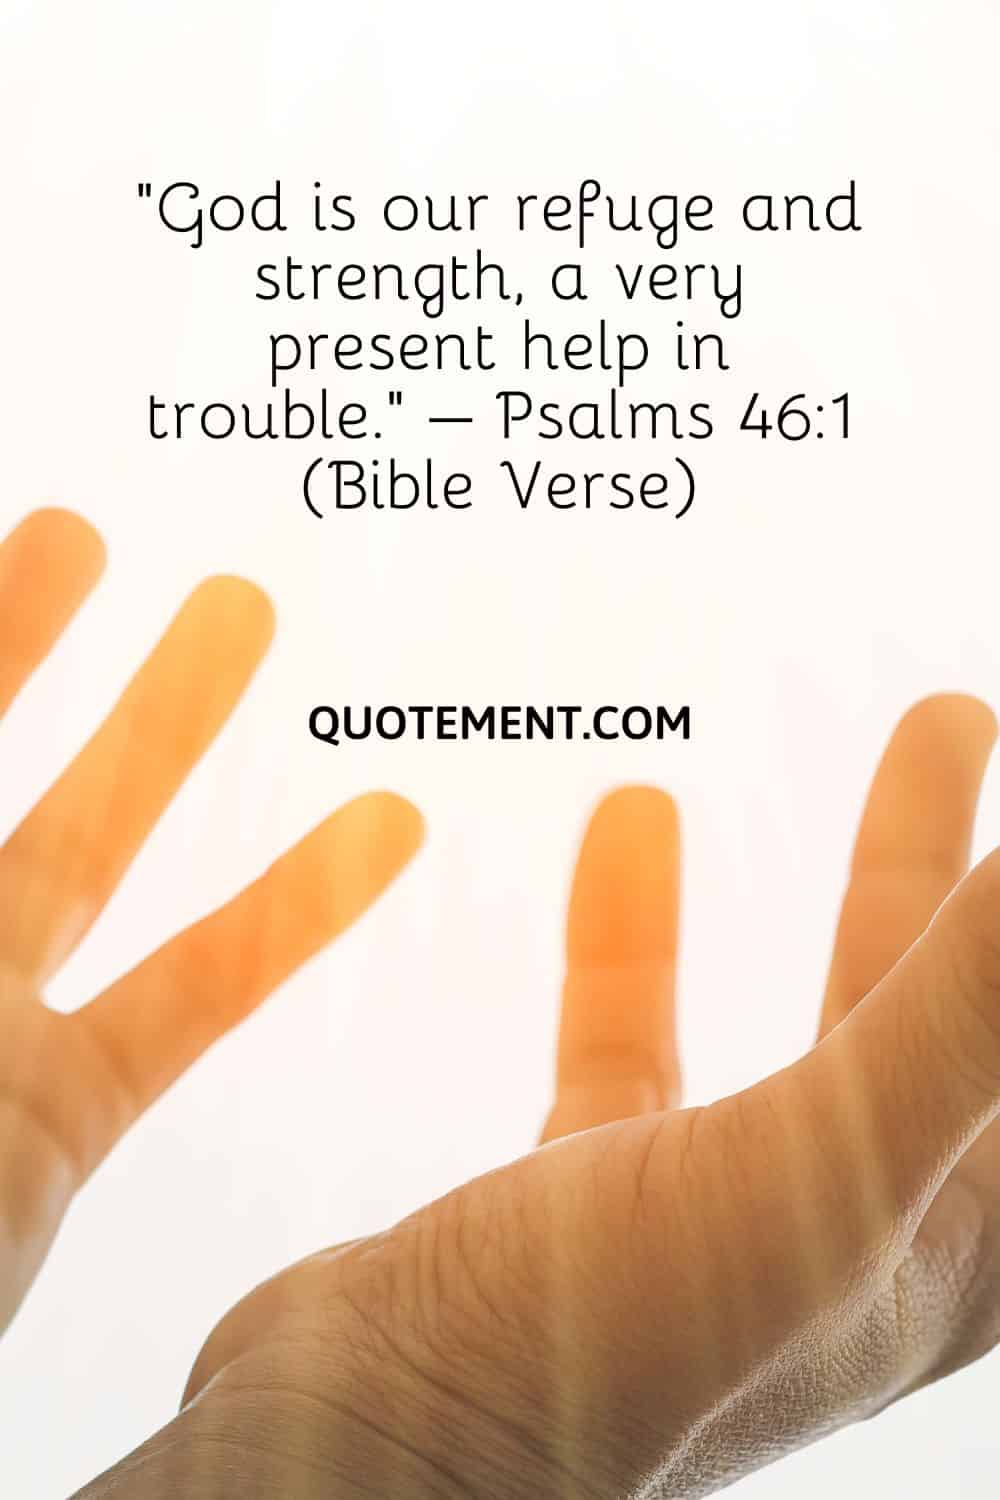 “God is our refuge and strength, a very present help in trouble.” – Psalms 461 (Bible Verse)